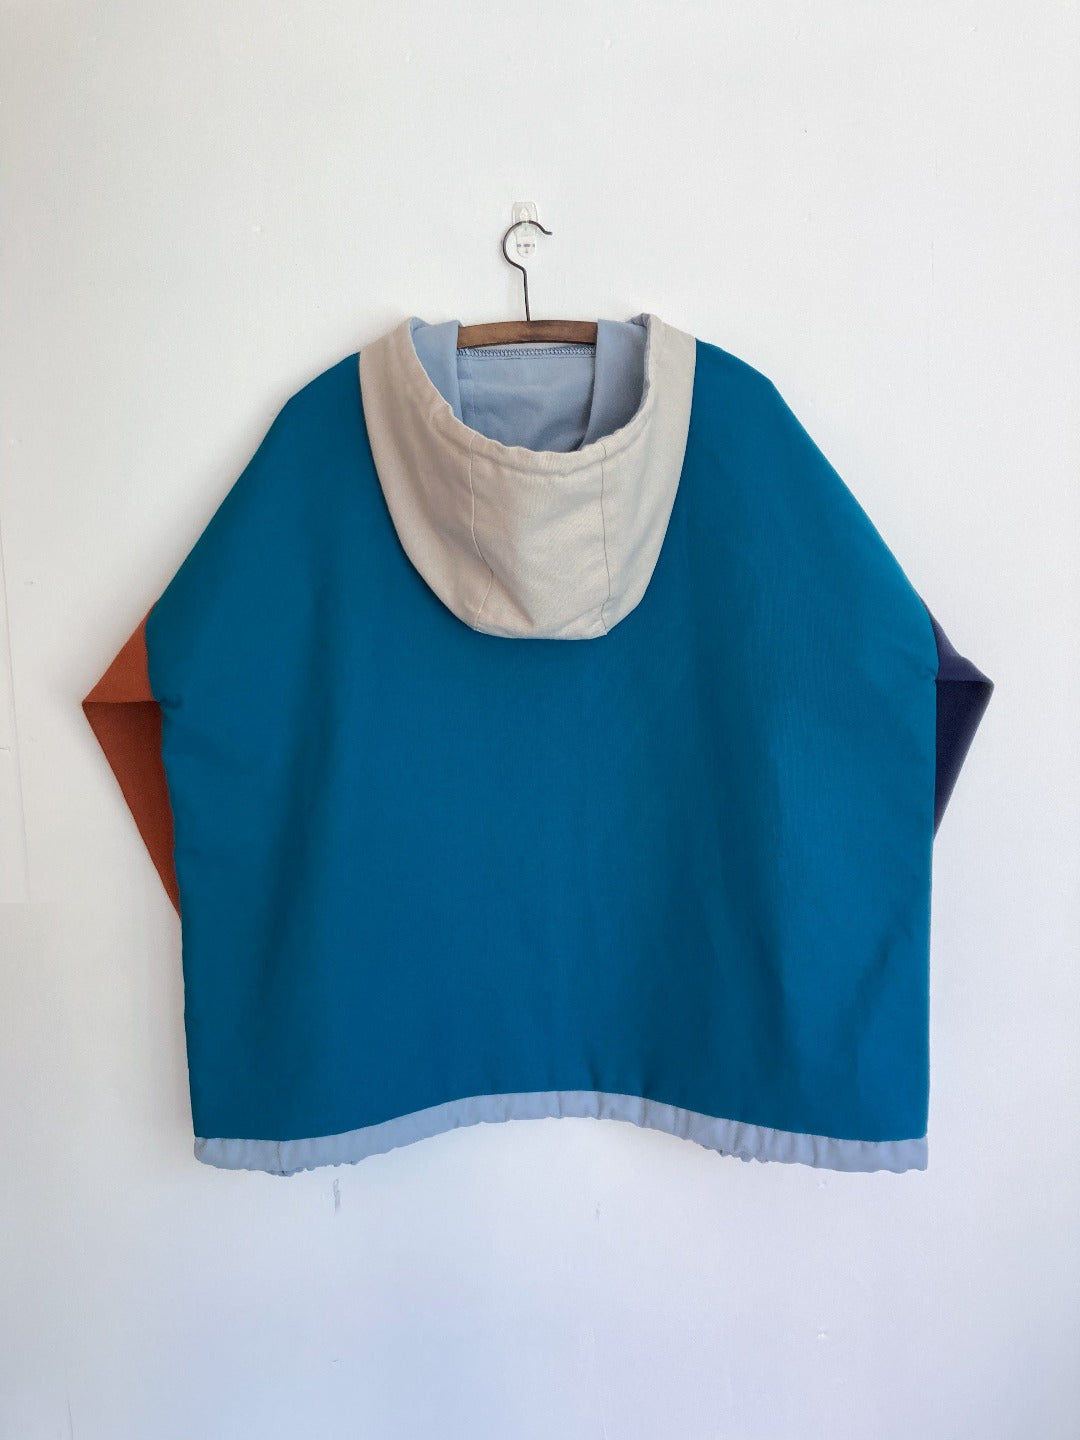 Block panel hooded pullover, teal, orange, stone and blue.